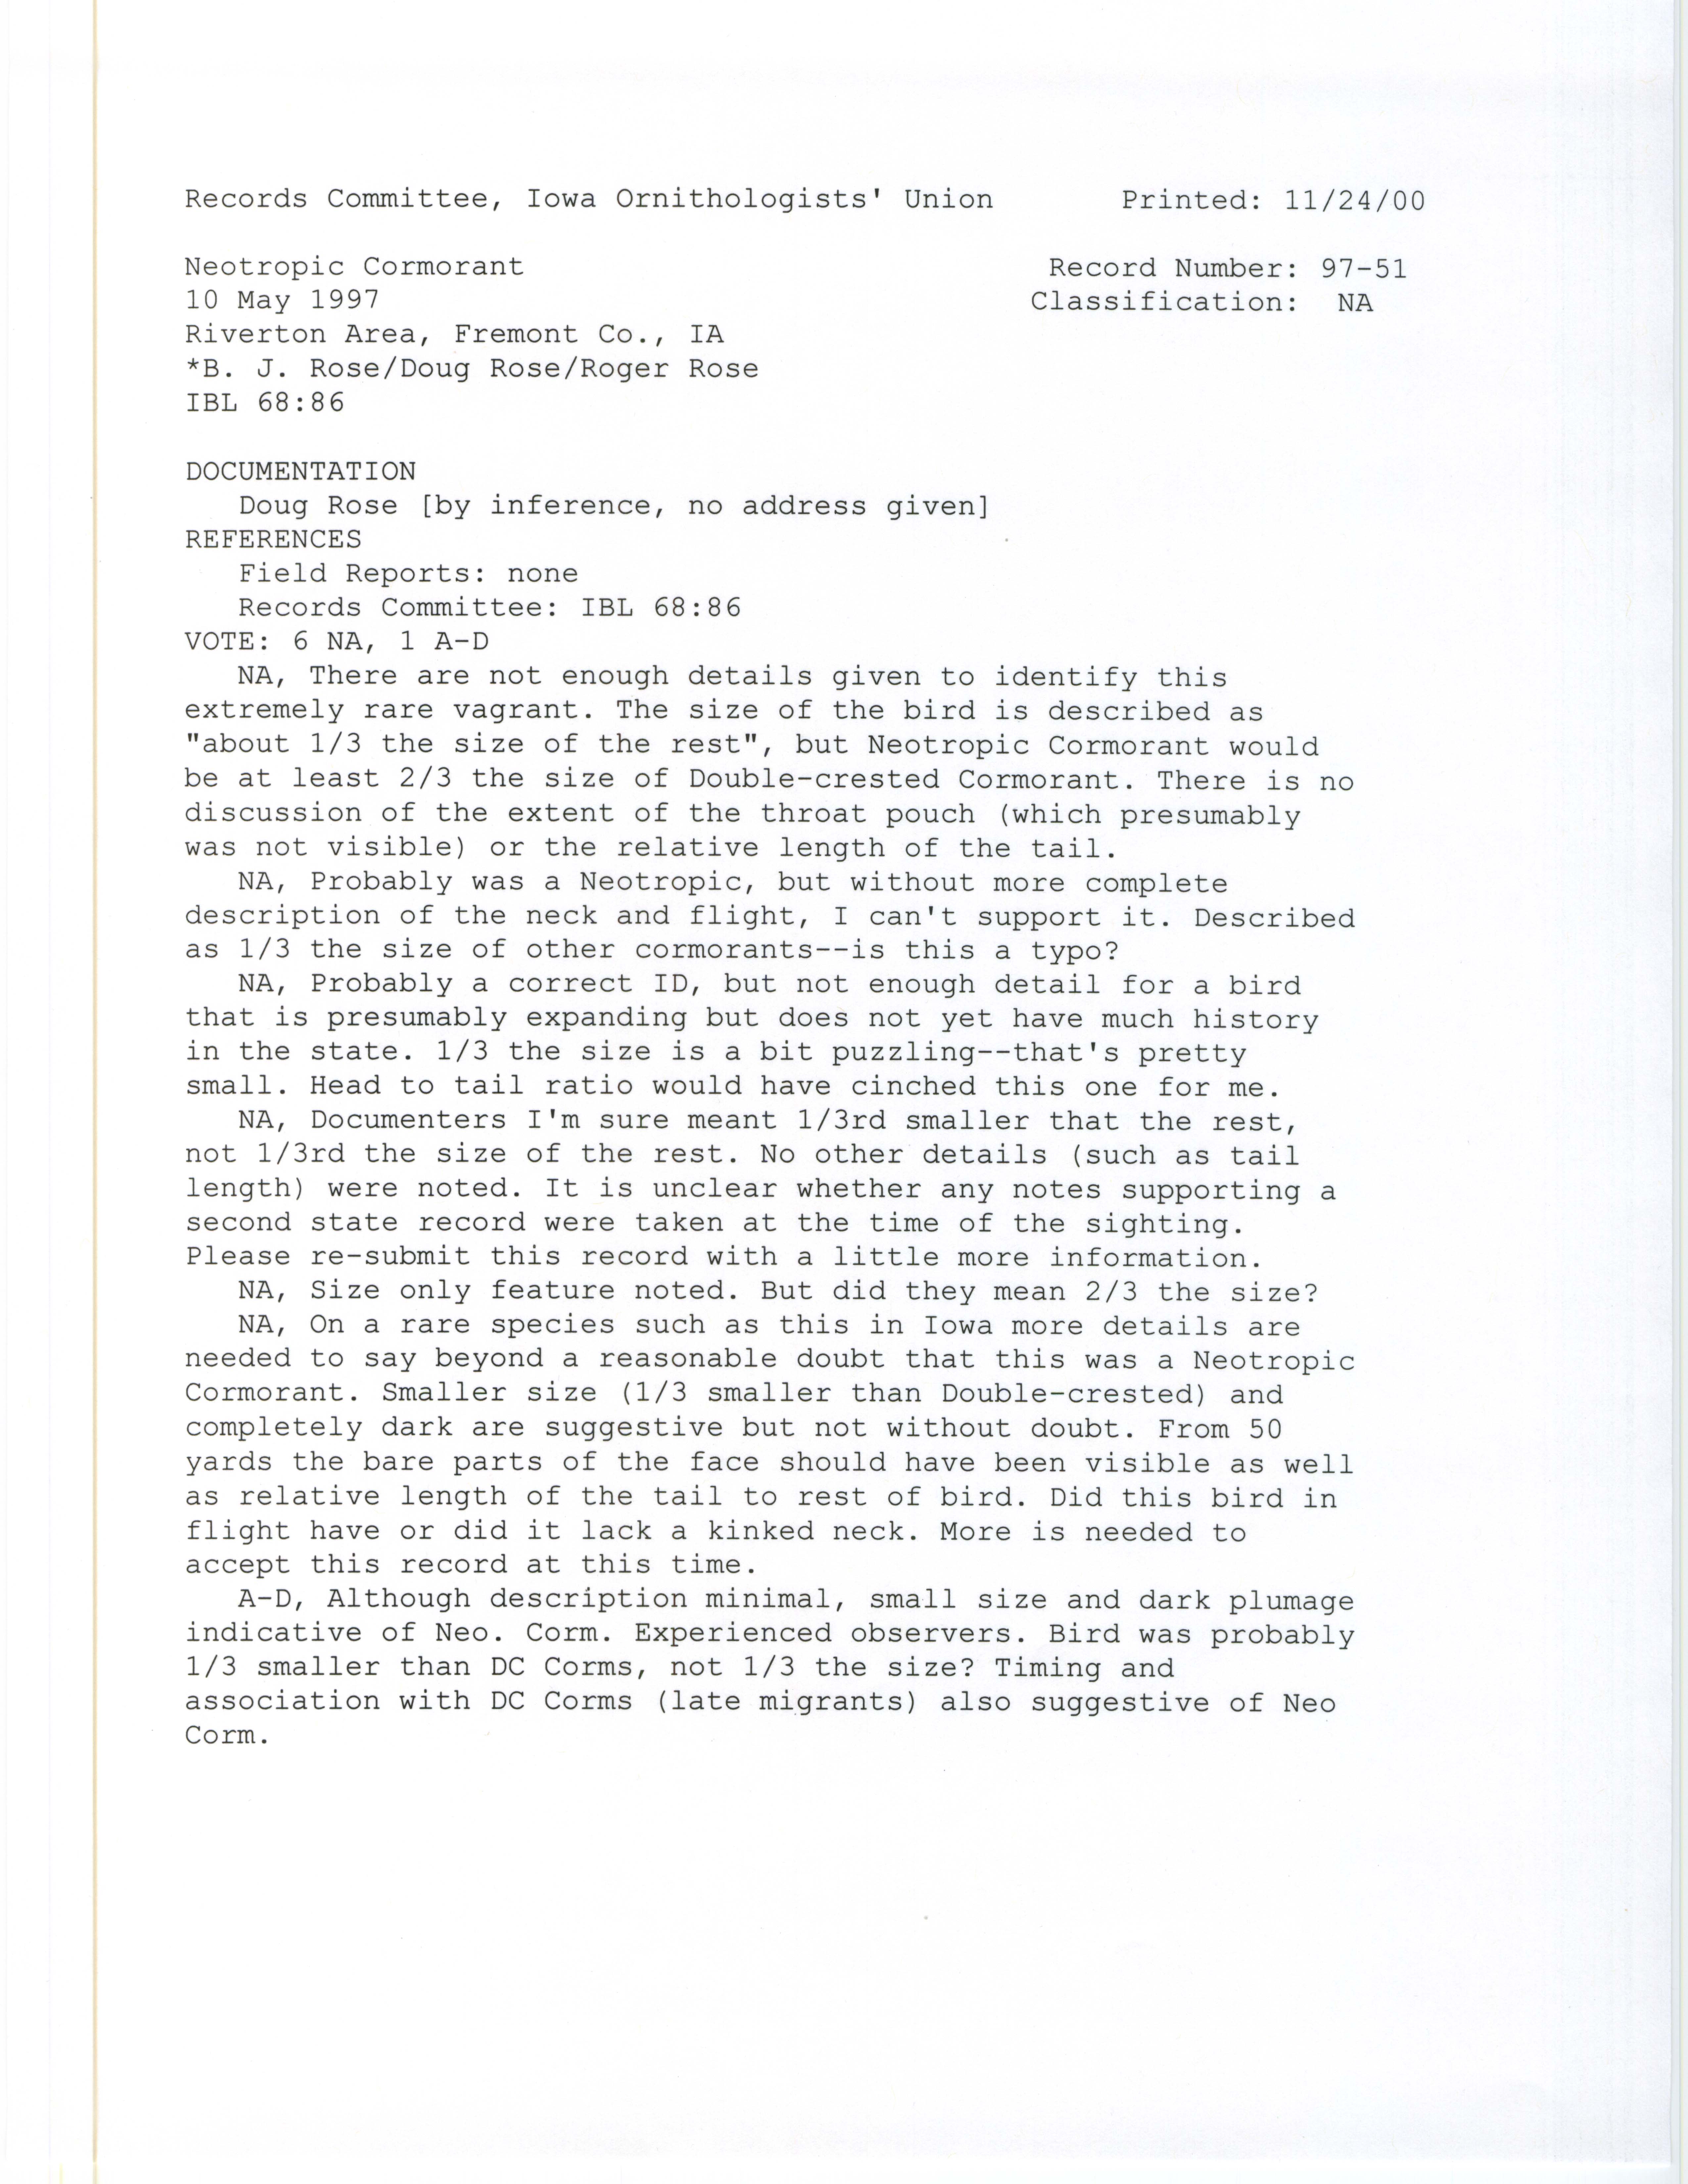 Records Committee review for rare bird sighting for Neotropic Cormorant at Riverton Area, 1997